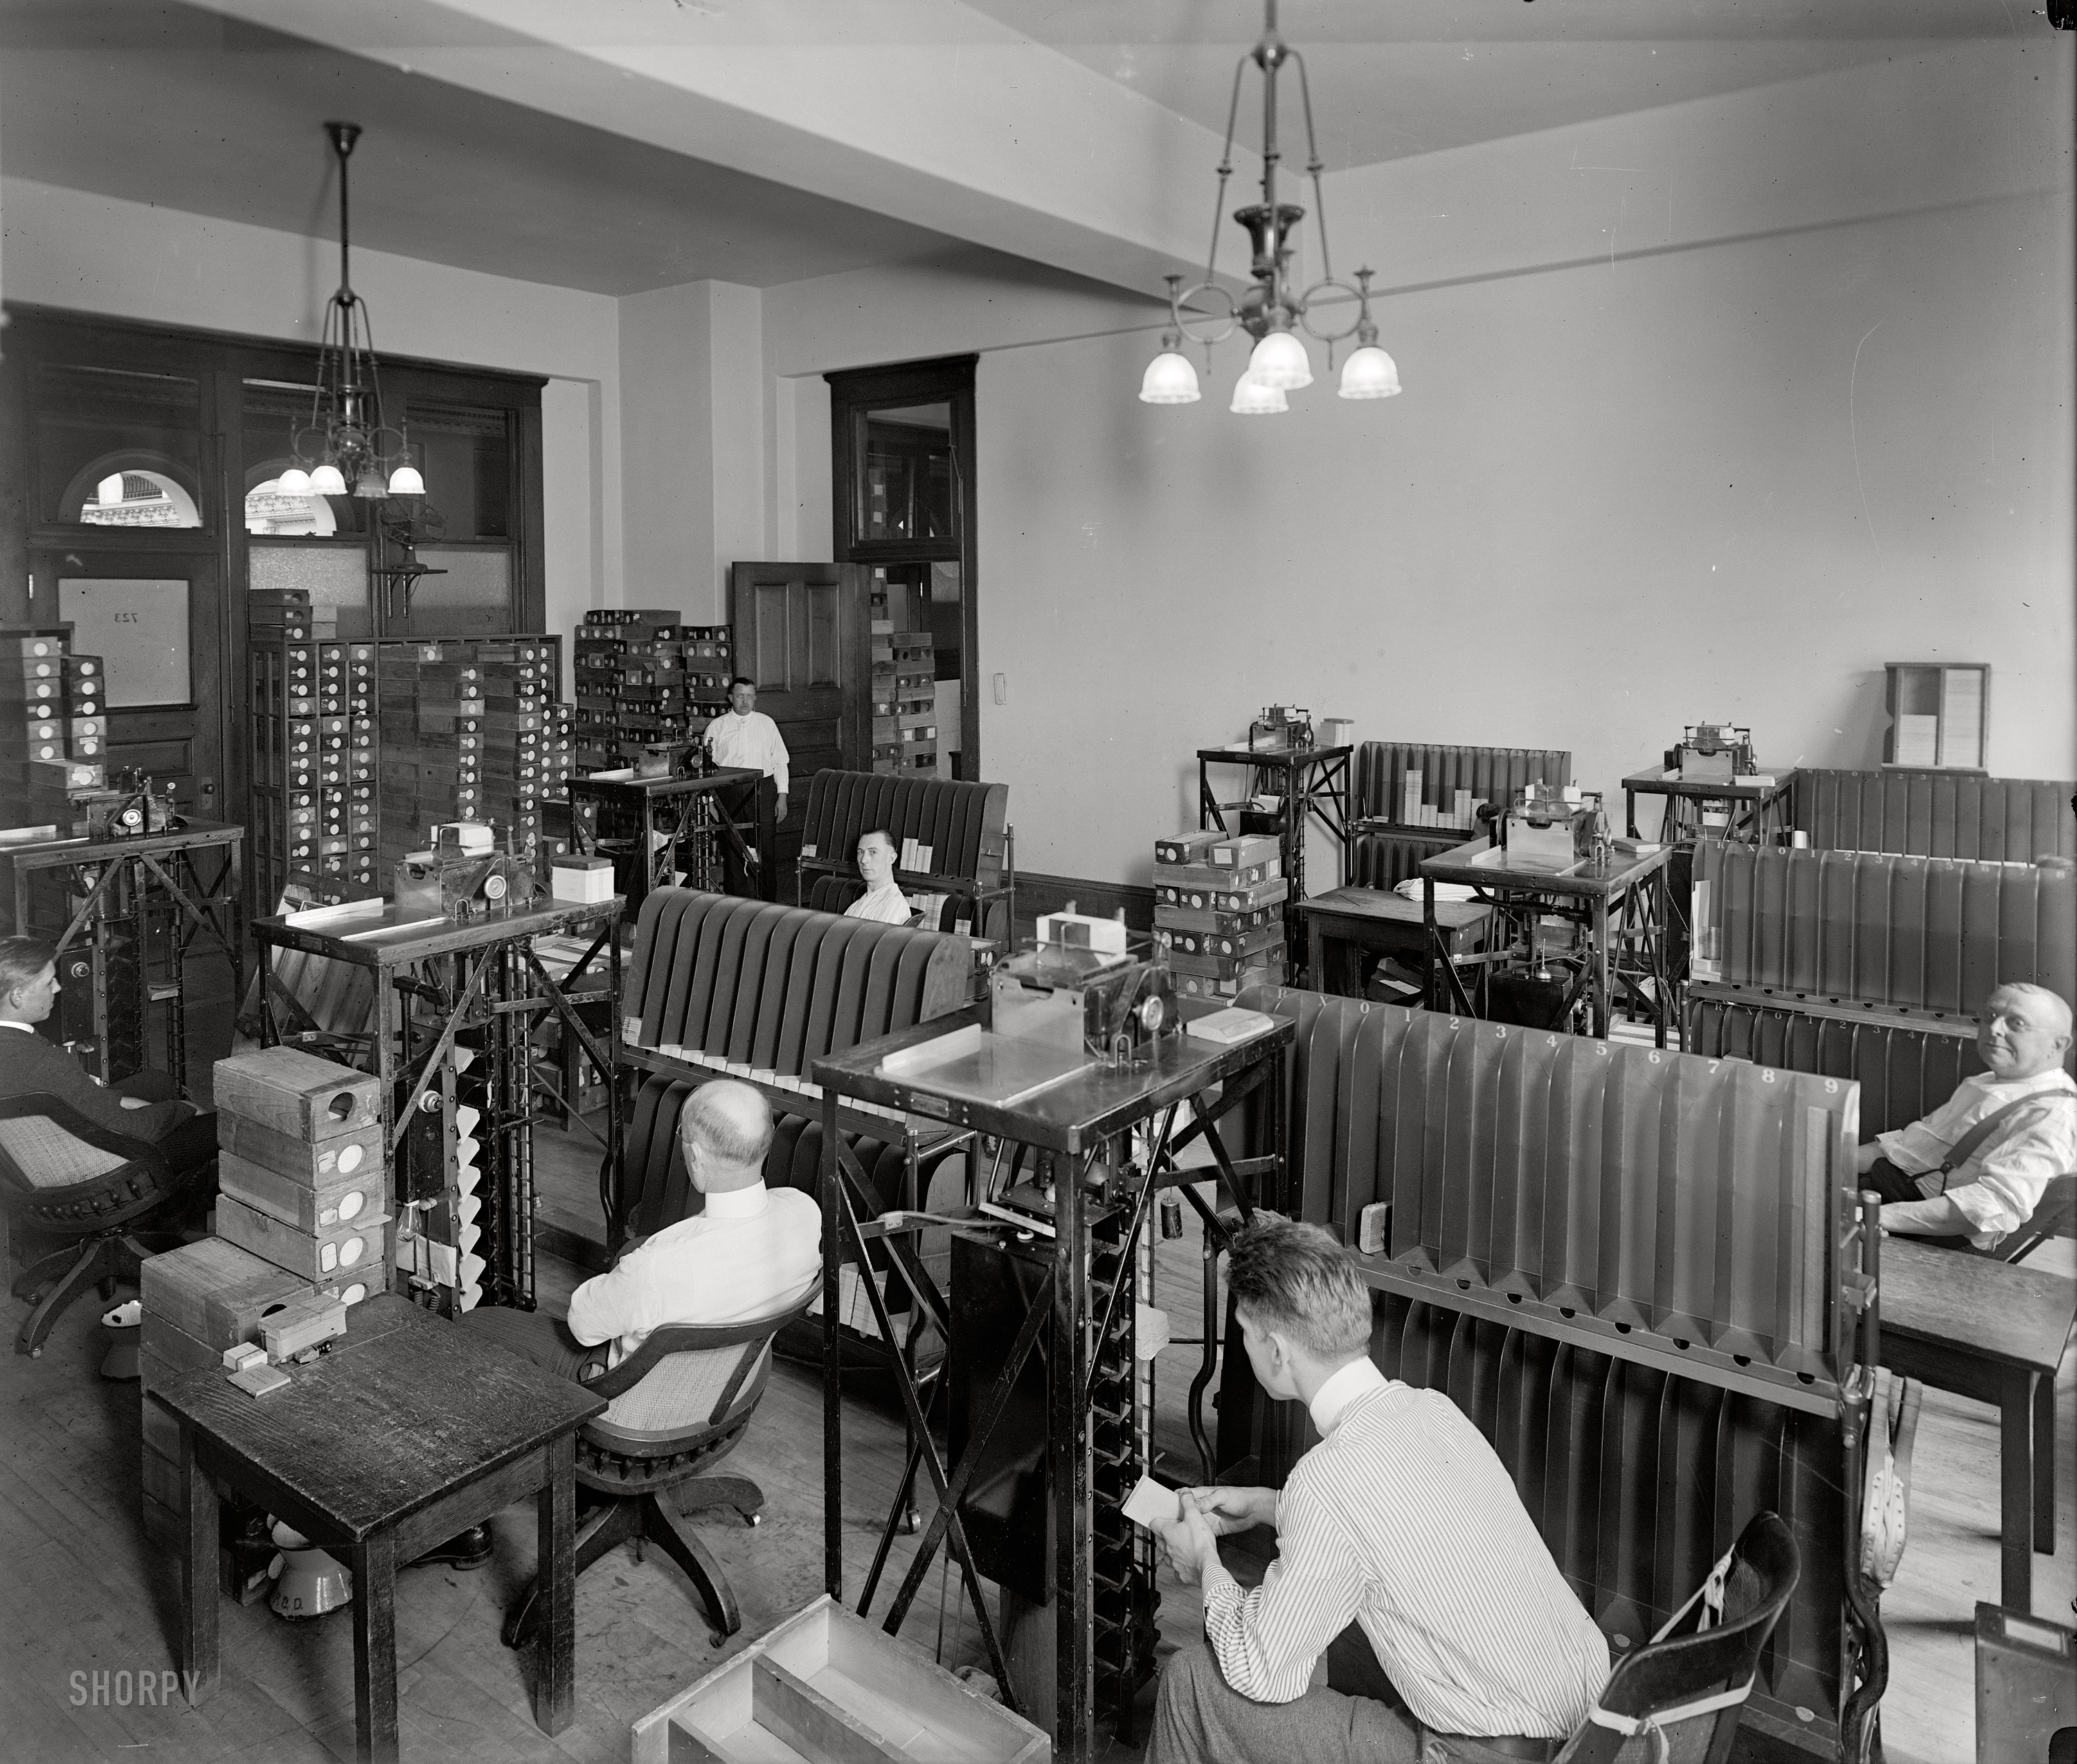 Washington, D.C., circa 1920. "Tabulating Machine Co." Our second look at the company's equipment. This installation is at the Old Post Office on Pennsylvania Avenue. Harris & Ewing Collection glass negative. View full size.